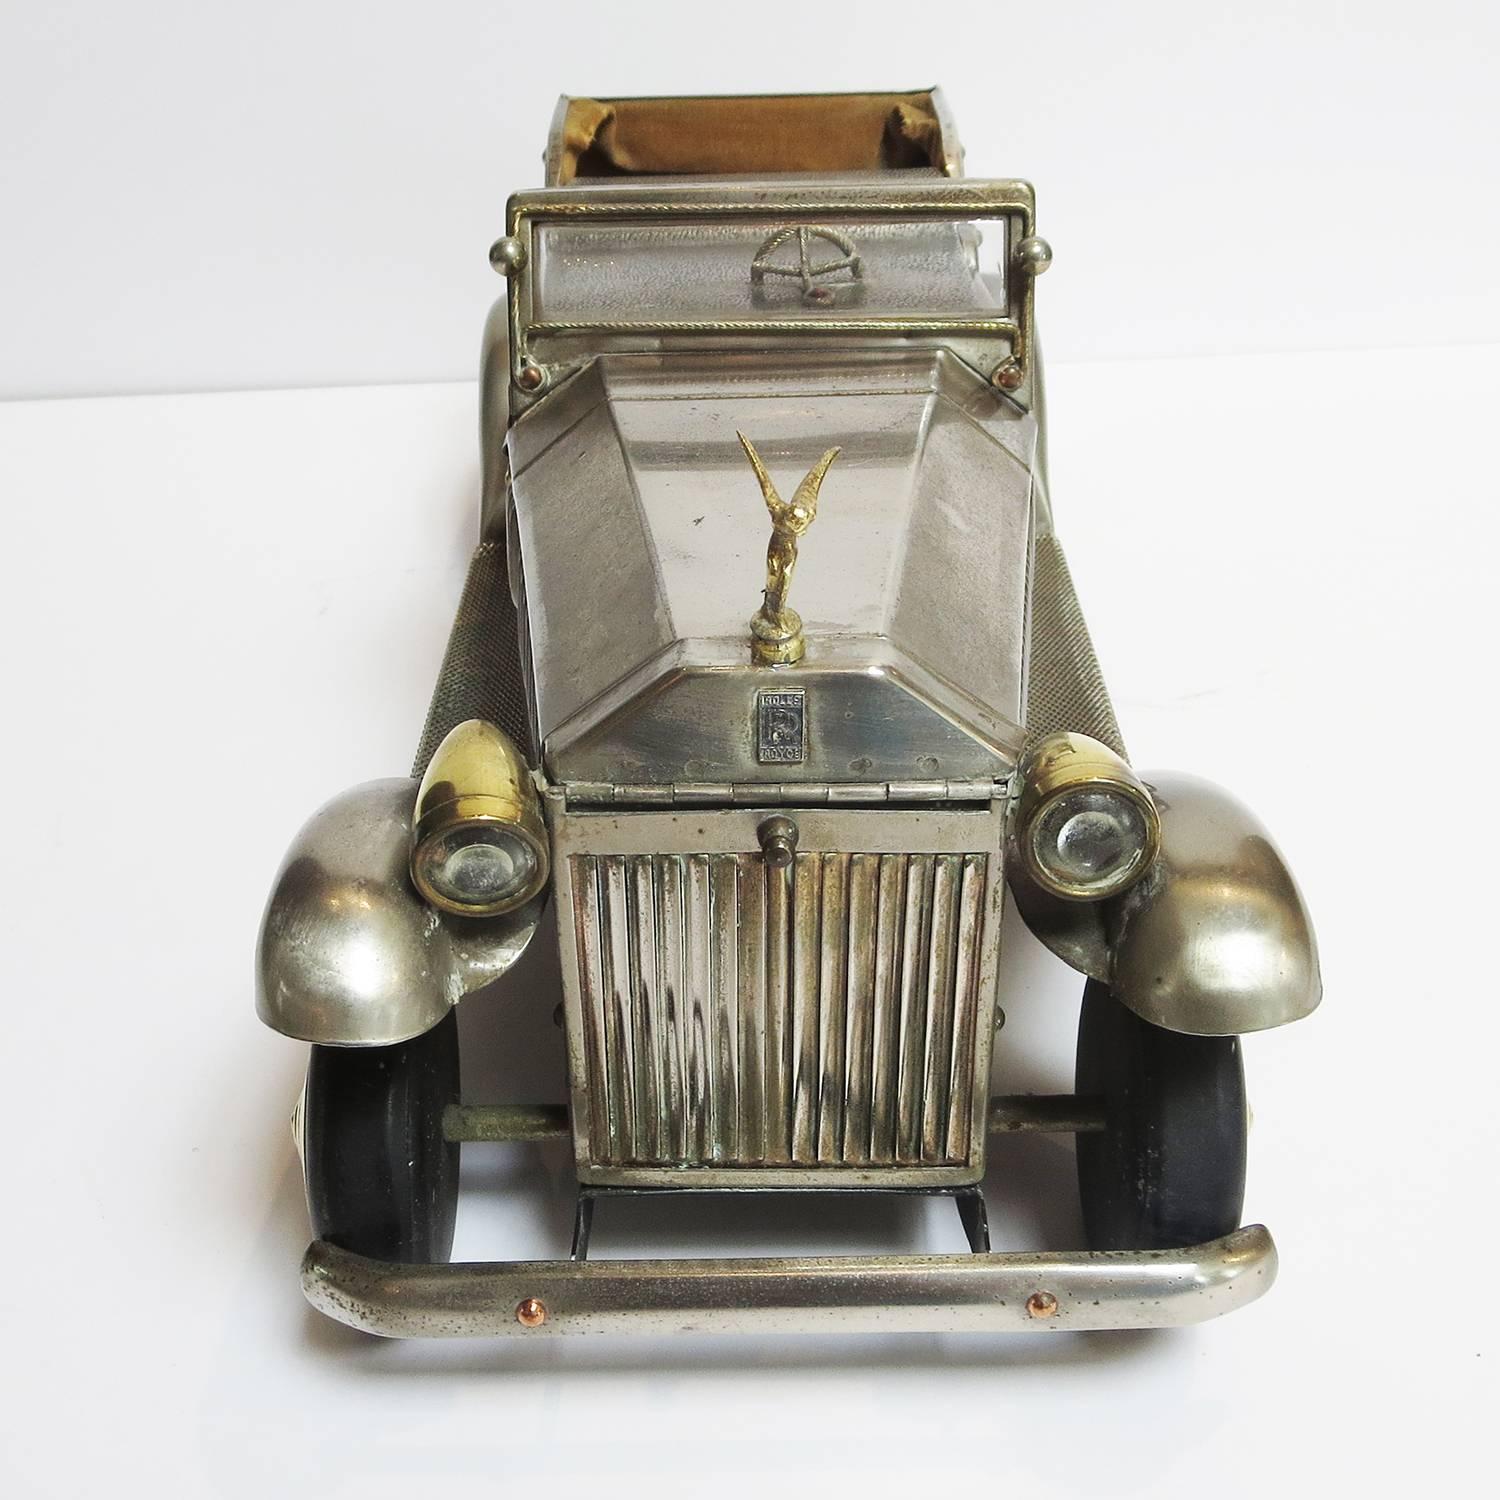 This charming jewelry box is crafted in the image of a classic 1930's Rolls Royce convertible. The car is finished in a satin nickel tone, with golden brass accents. The hood lifts up from the windshield, and is slotted for rings or cufflinks. The